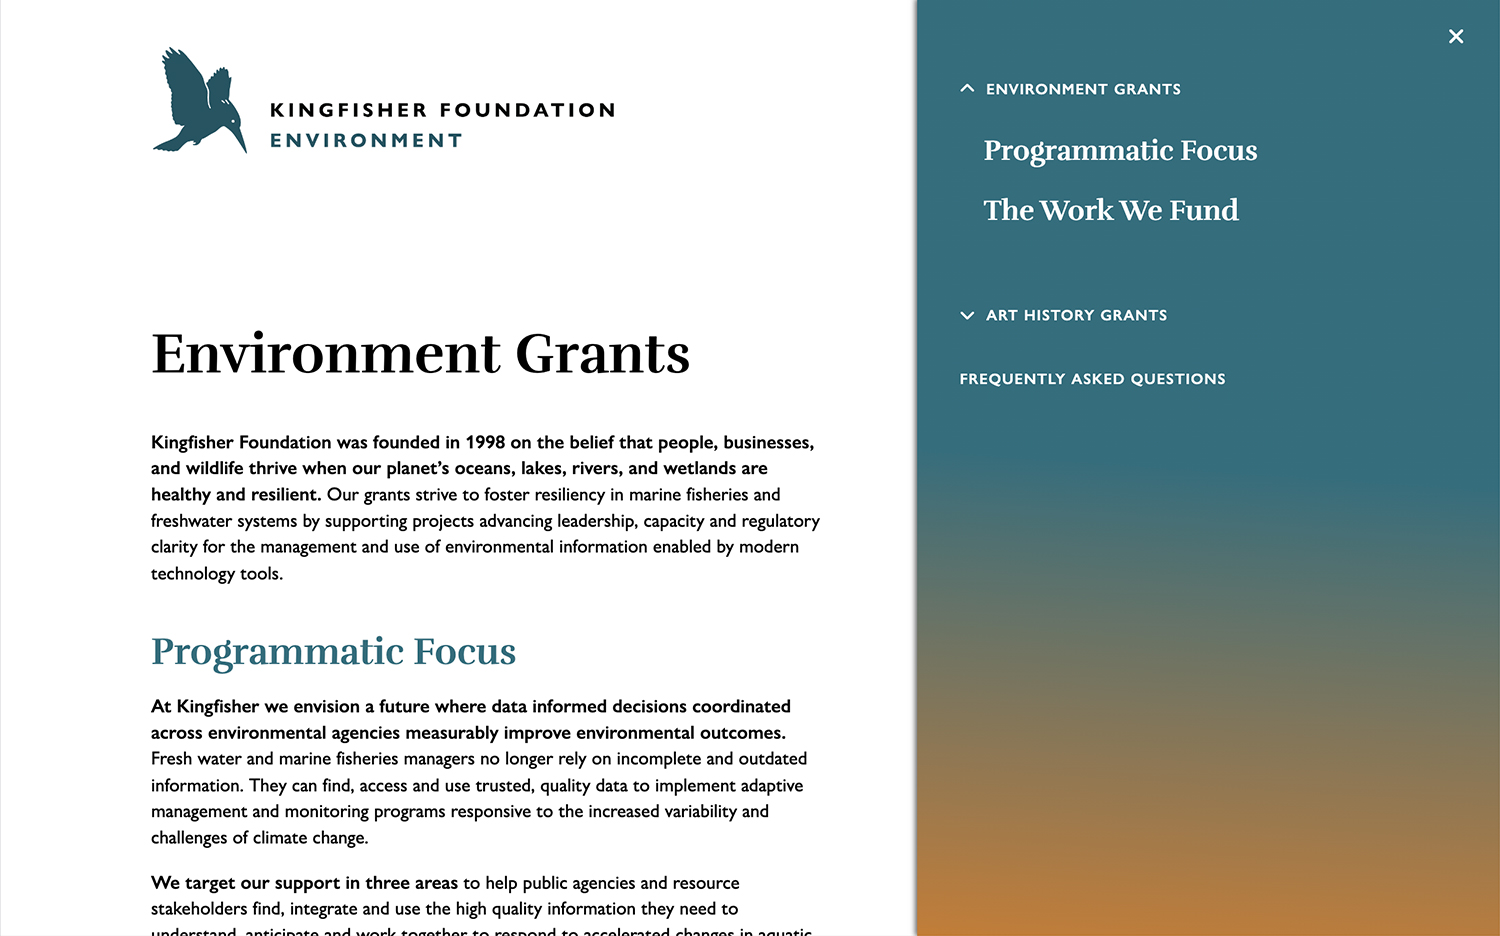 Environment Grants page